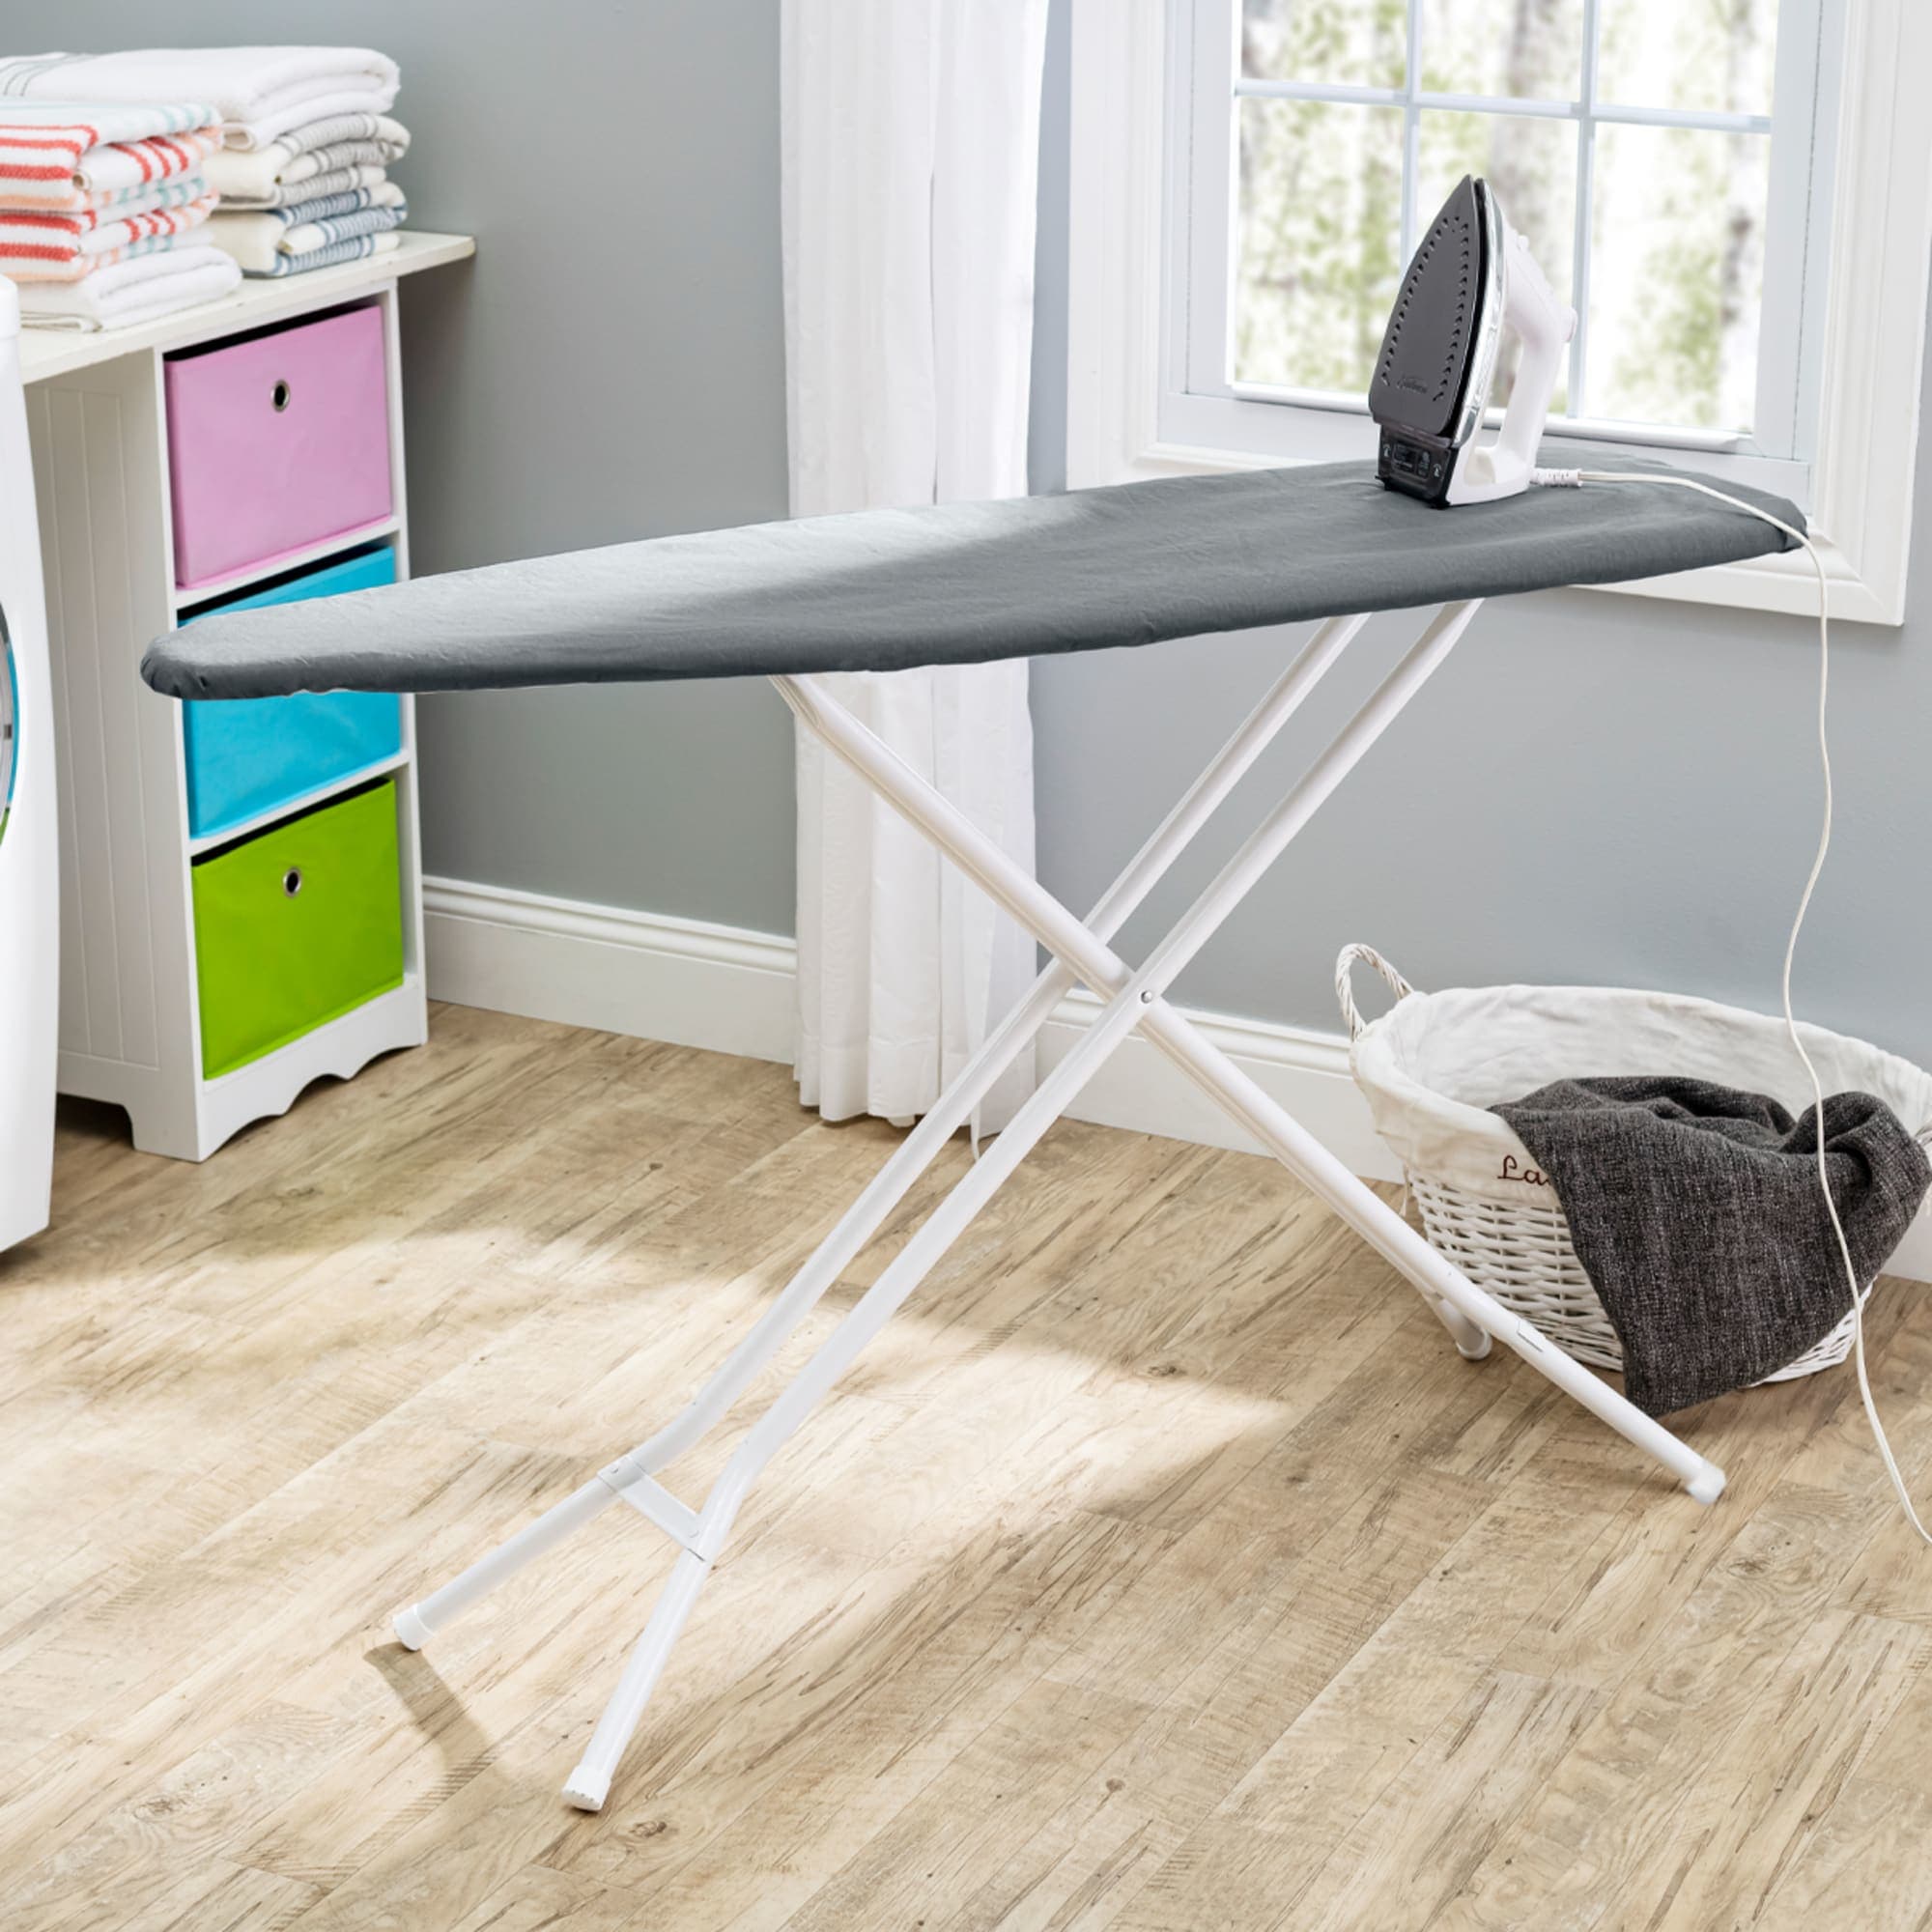 Seymour Home Products Adjustable Height, 4 Leg Ironing Board with Perforated Top, Dark Gray (4 Pack) $30.00 EACH, CASE PACK OF 4